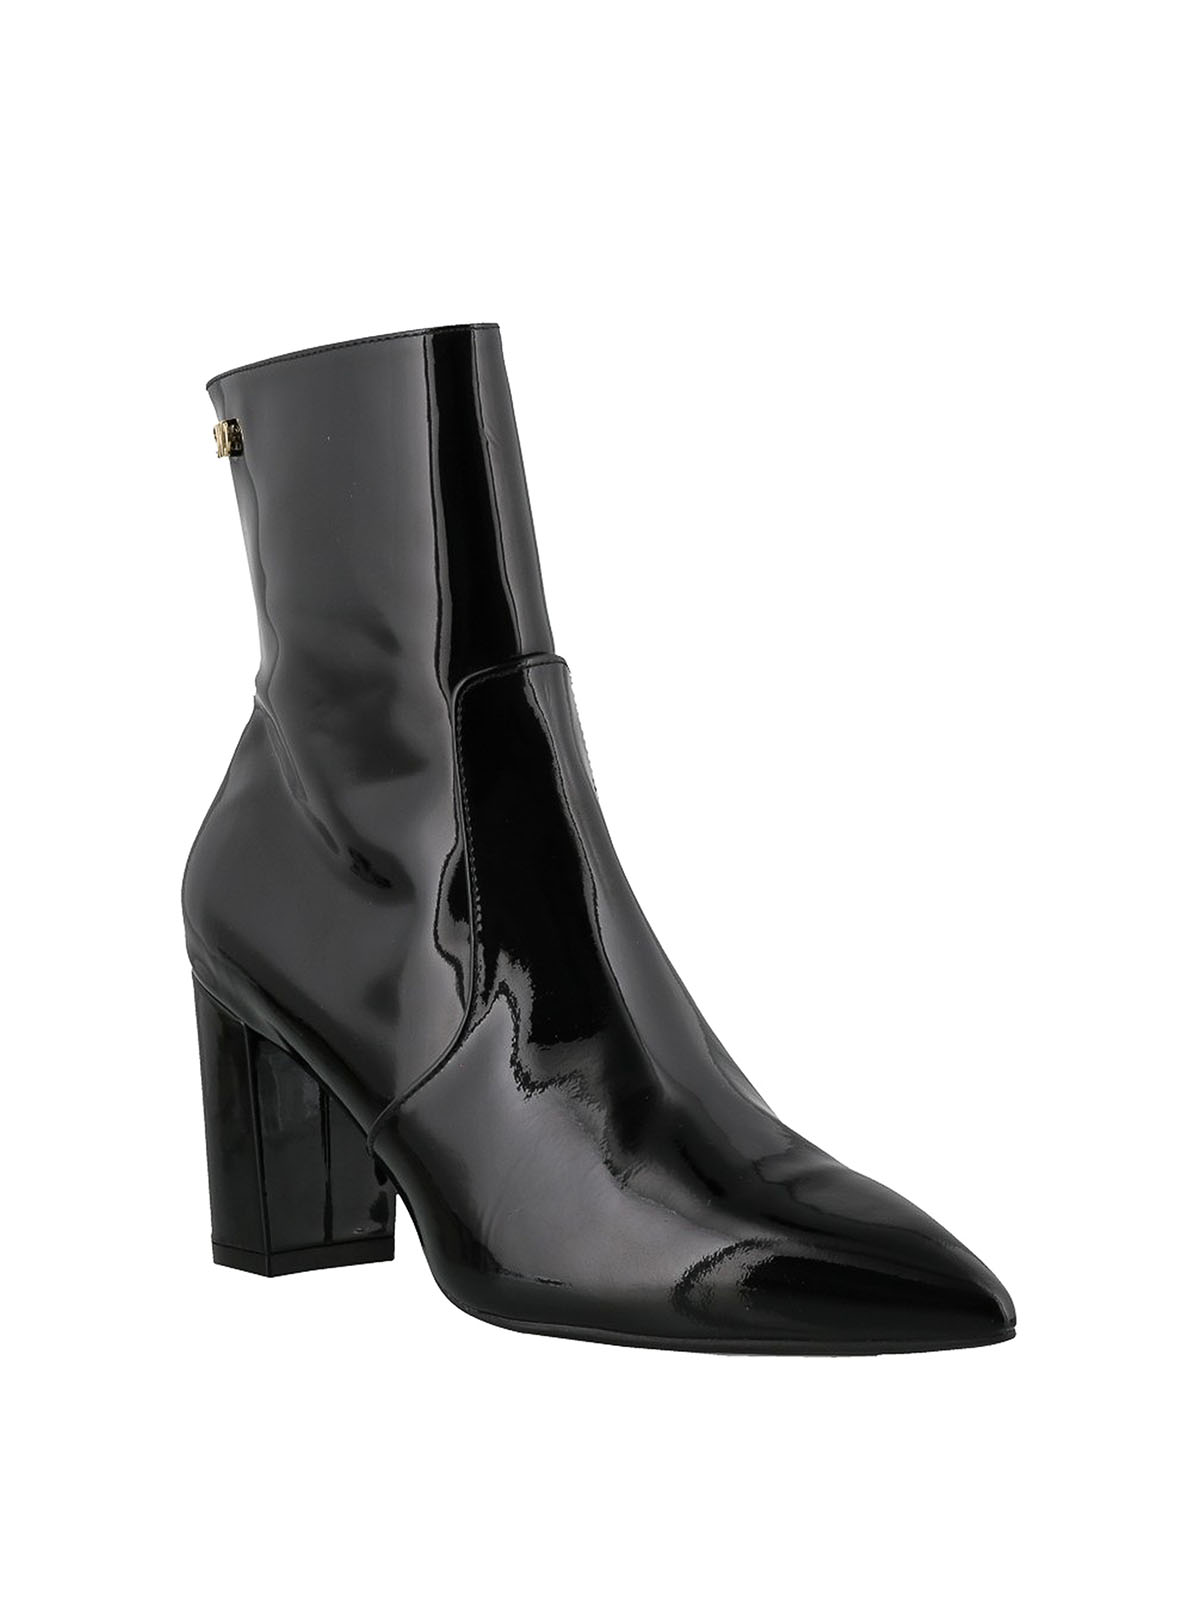 stuart weitzman patent leather ankle boots